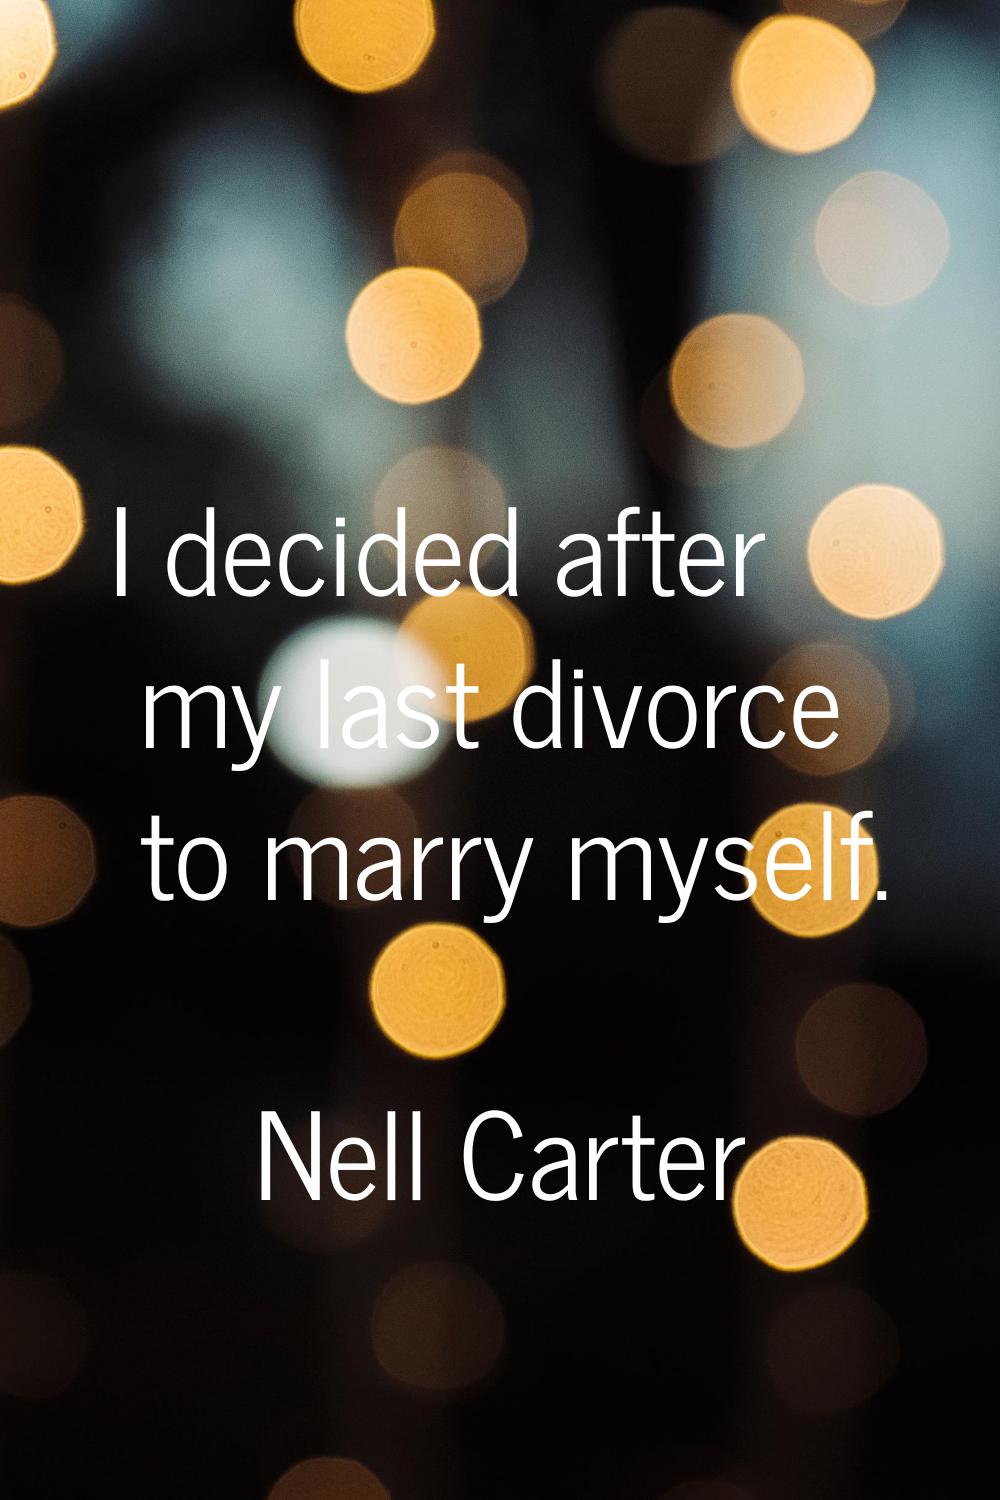 I decided after my last divorce to marry myself.